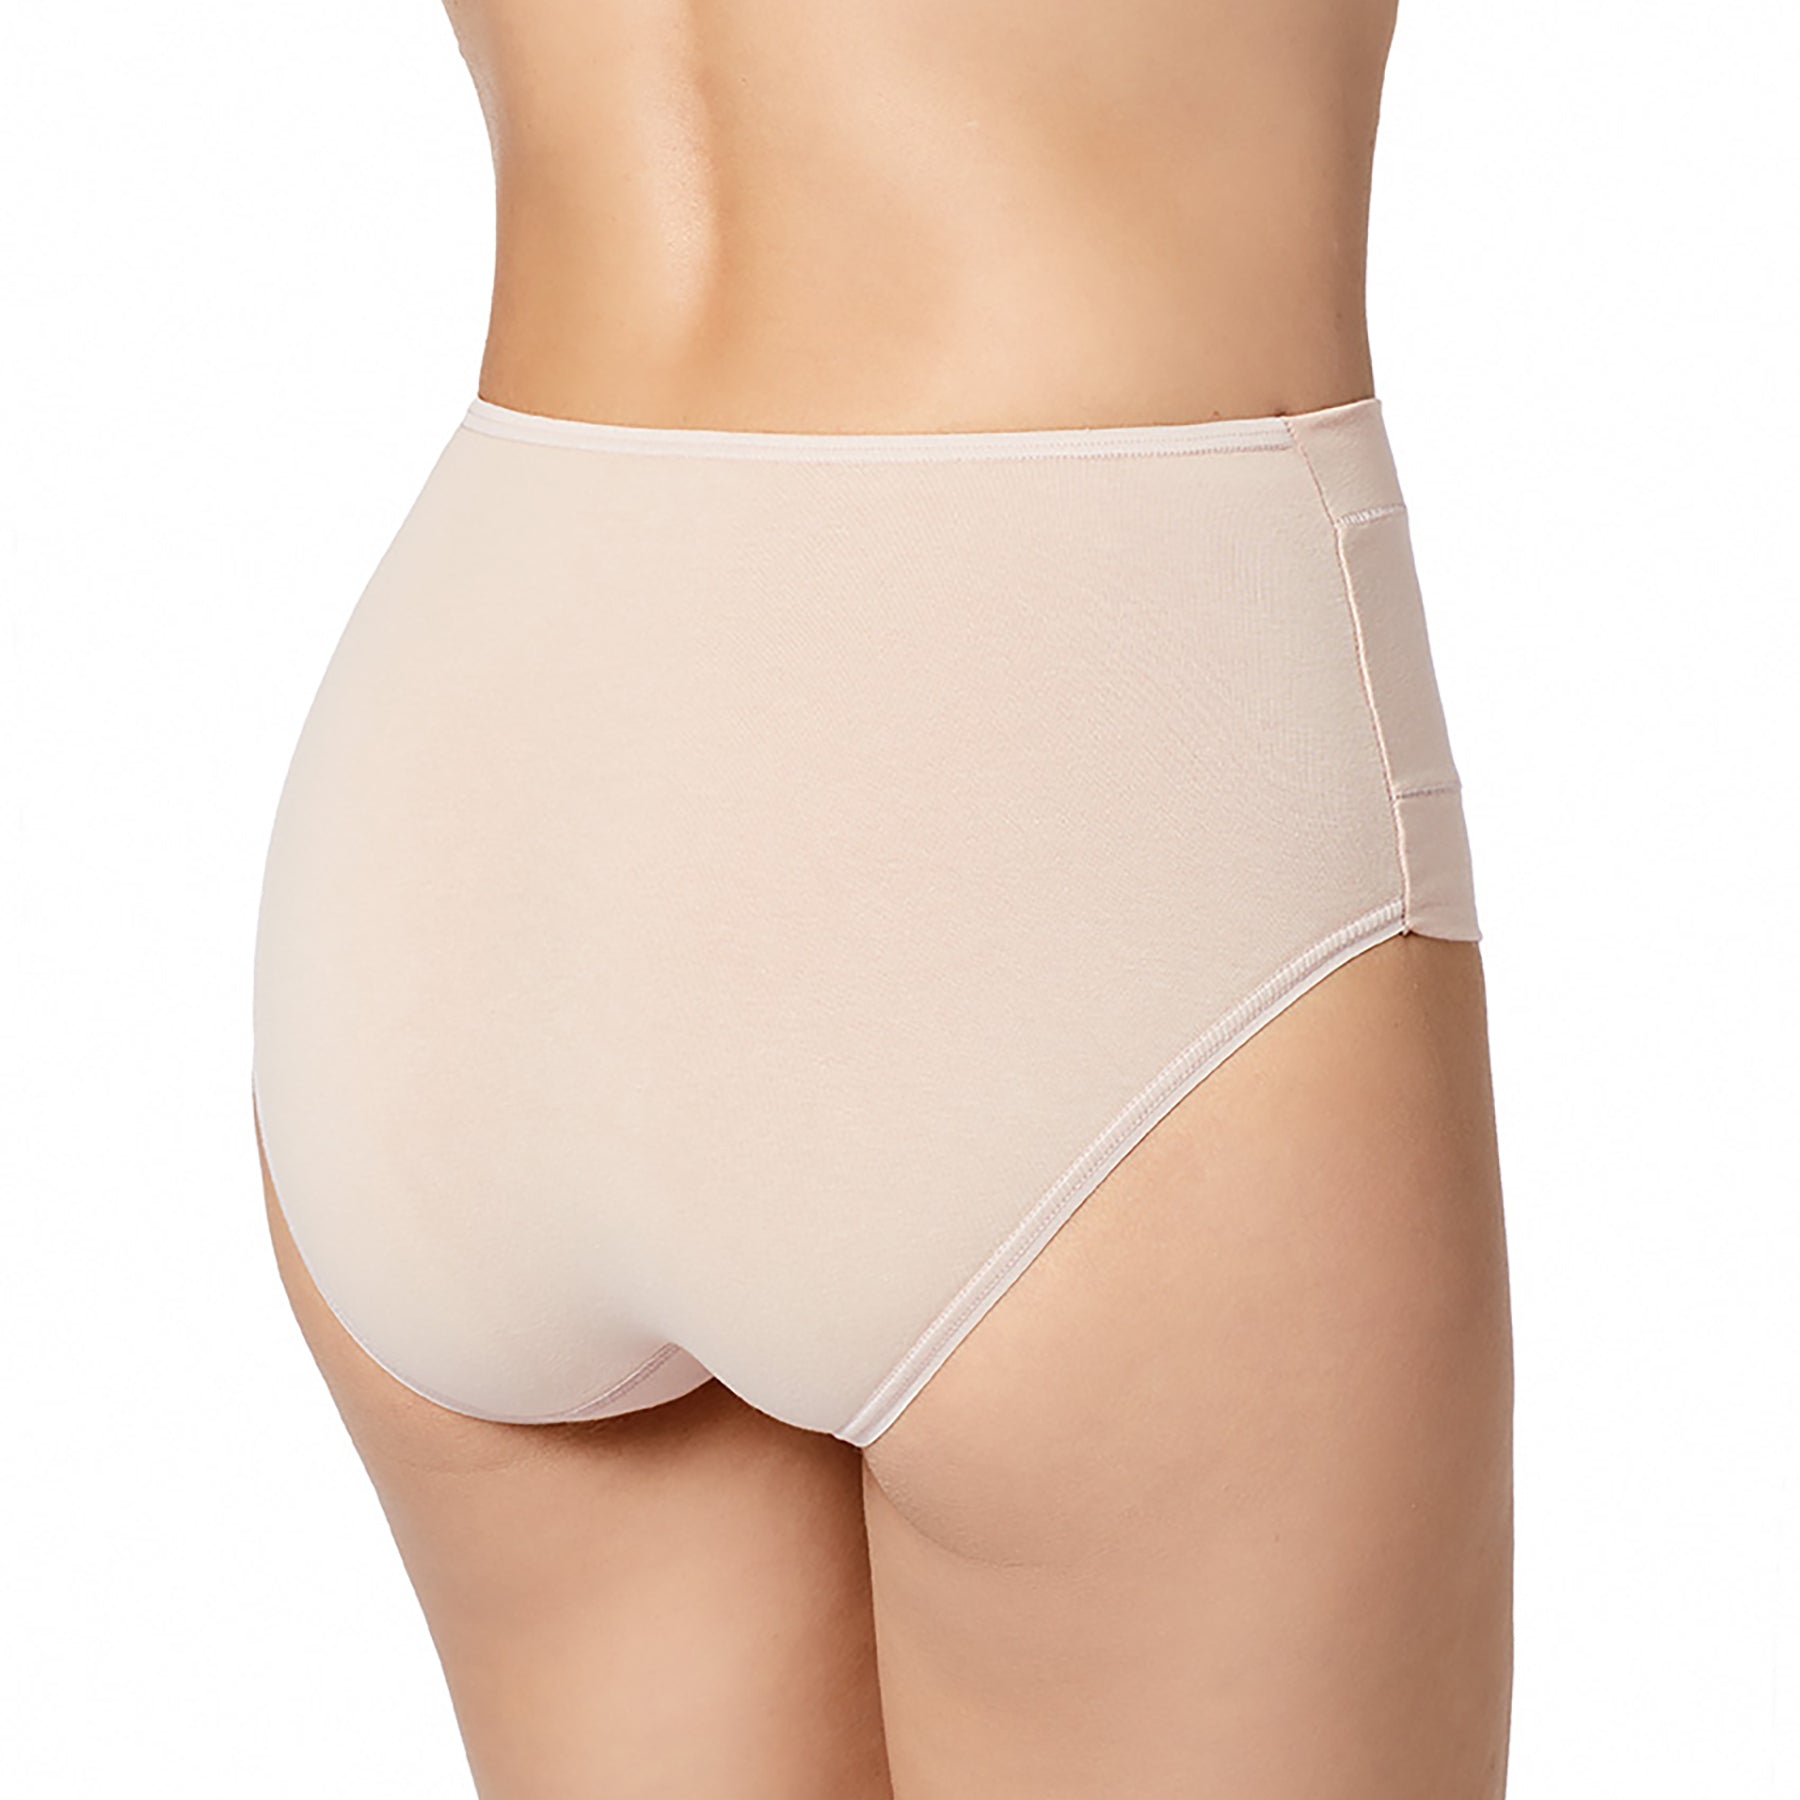 Bali Essentials Double Support Brief Panty Shapewear Women's 3X/10